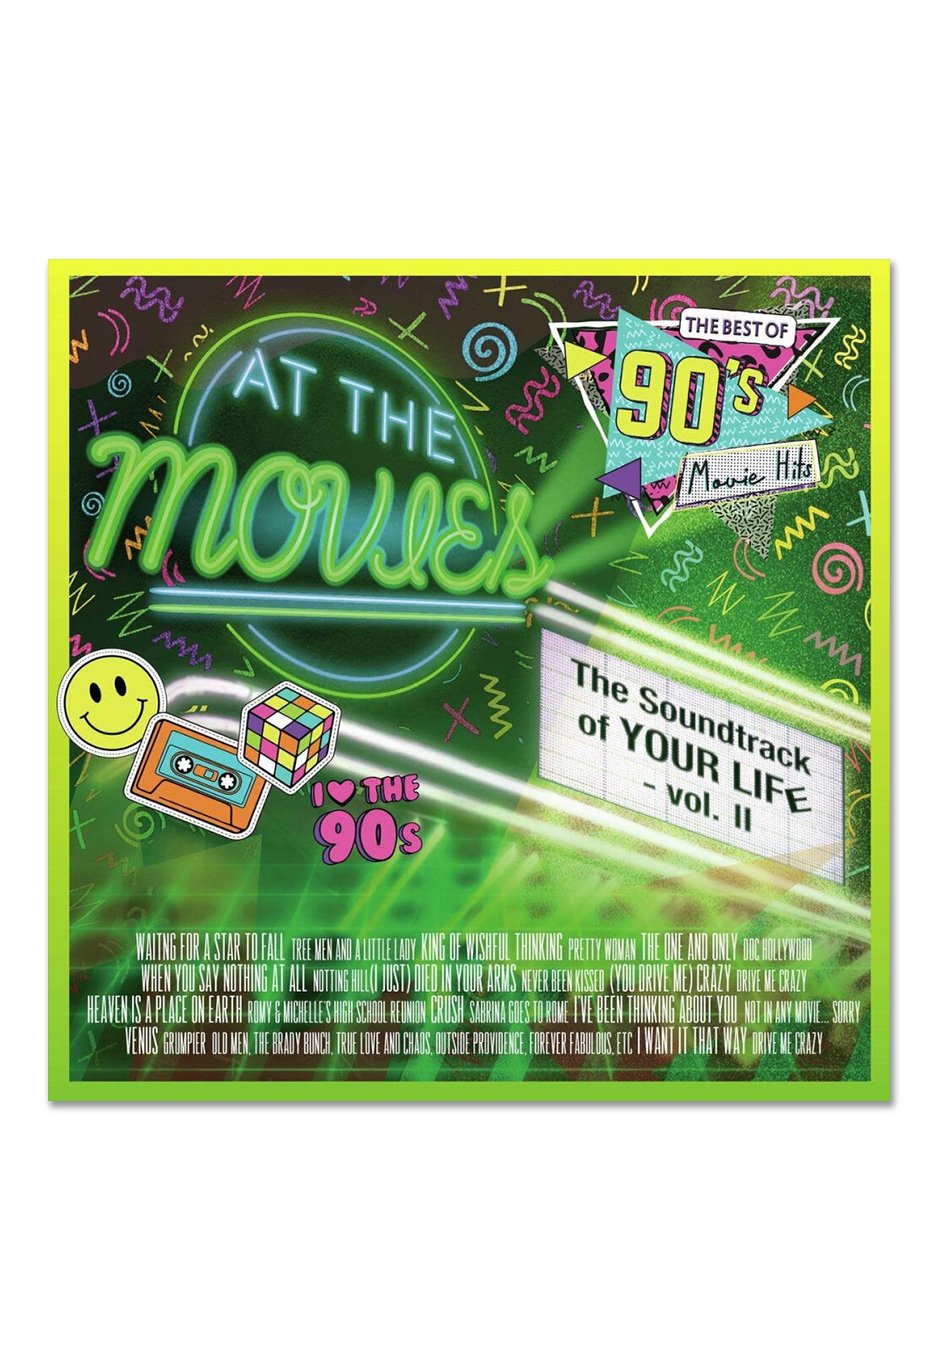 At The Movies - Soundtrack Of Your Life Vol. 2 Yellow - Colored Vinyl